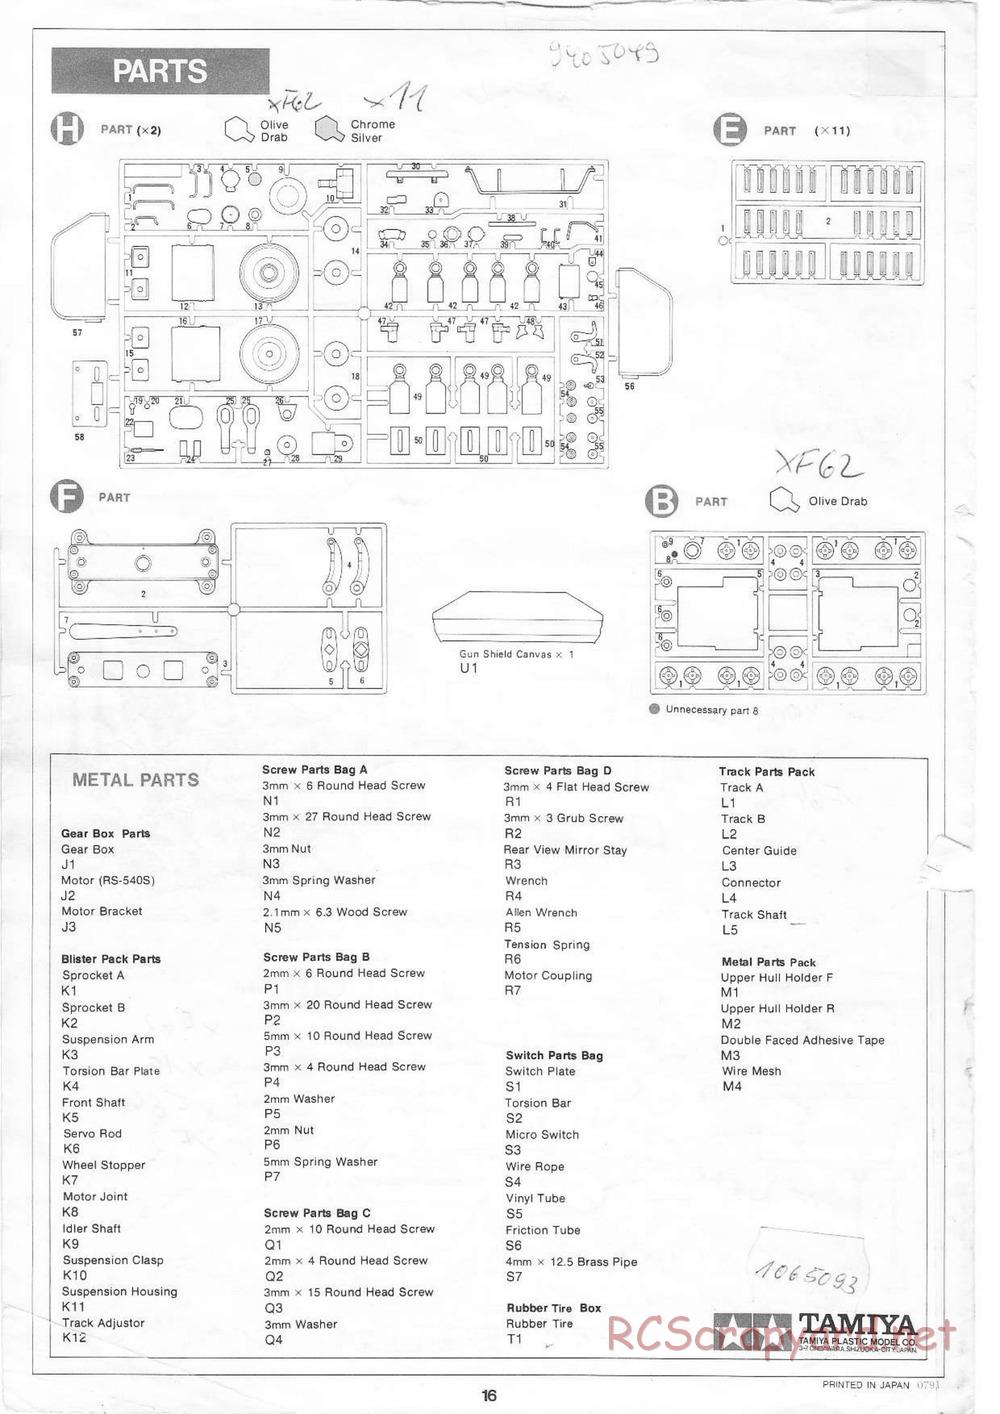 Tamiya - Leopard A4 - 1/16 Scale Chassis - Manual - Page 16